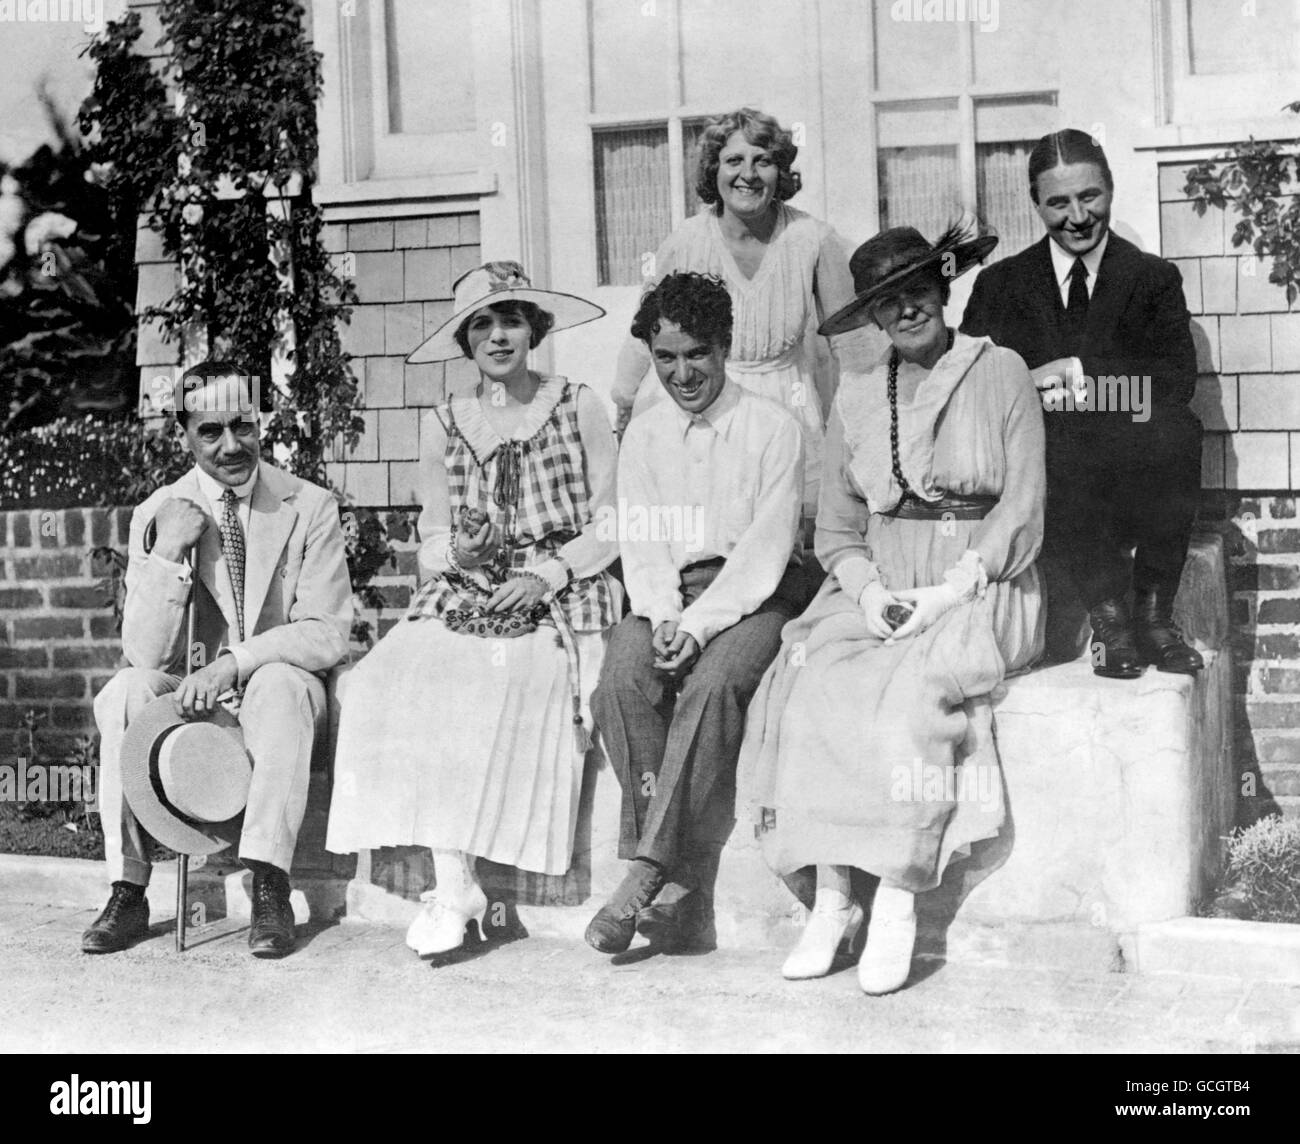 Group photograph taken in Los Angeles, Top row- Mr and Mrs Syd Chaplin, Bottom row - Miss Iza Claire's manager, Miss Iza Claire (actress), Charlie Chaplin, and Mrs Claire. Circa Date. Stock Photo